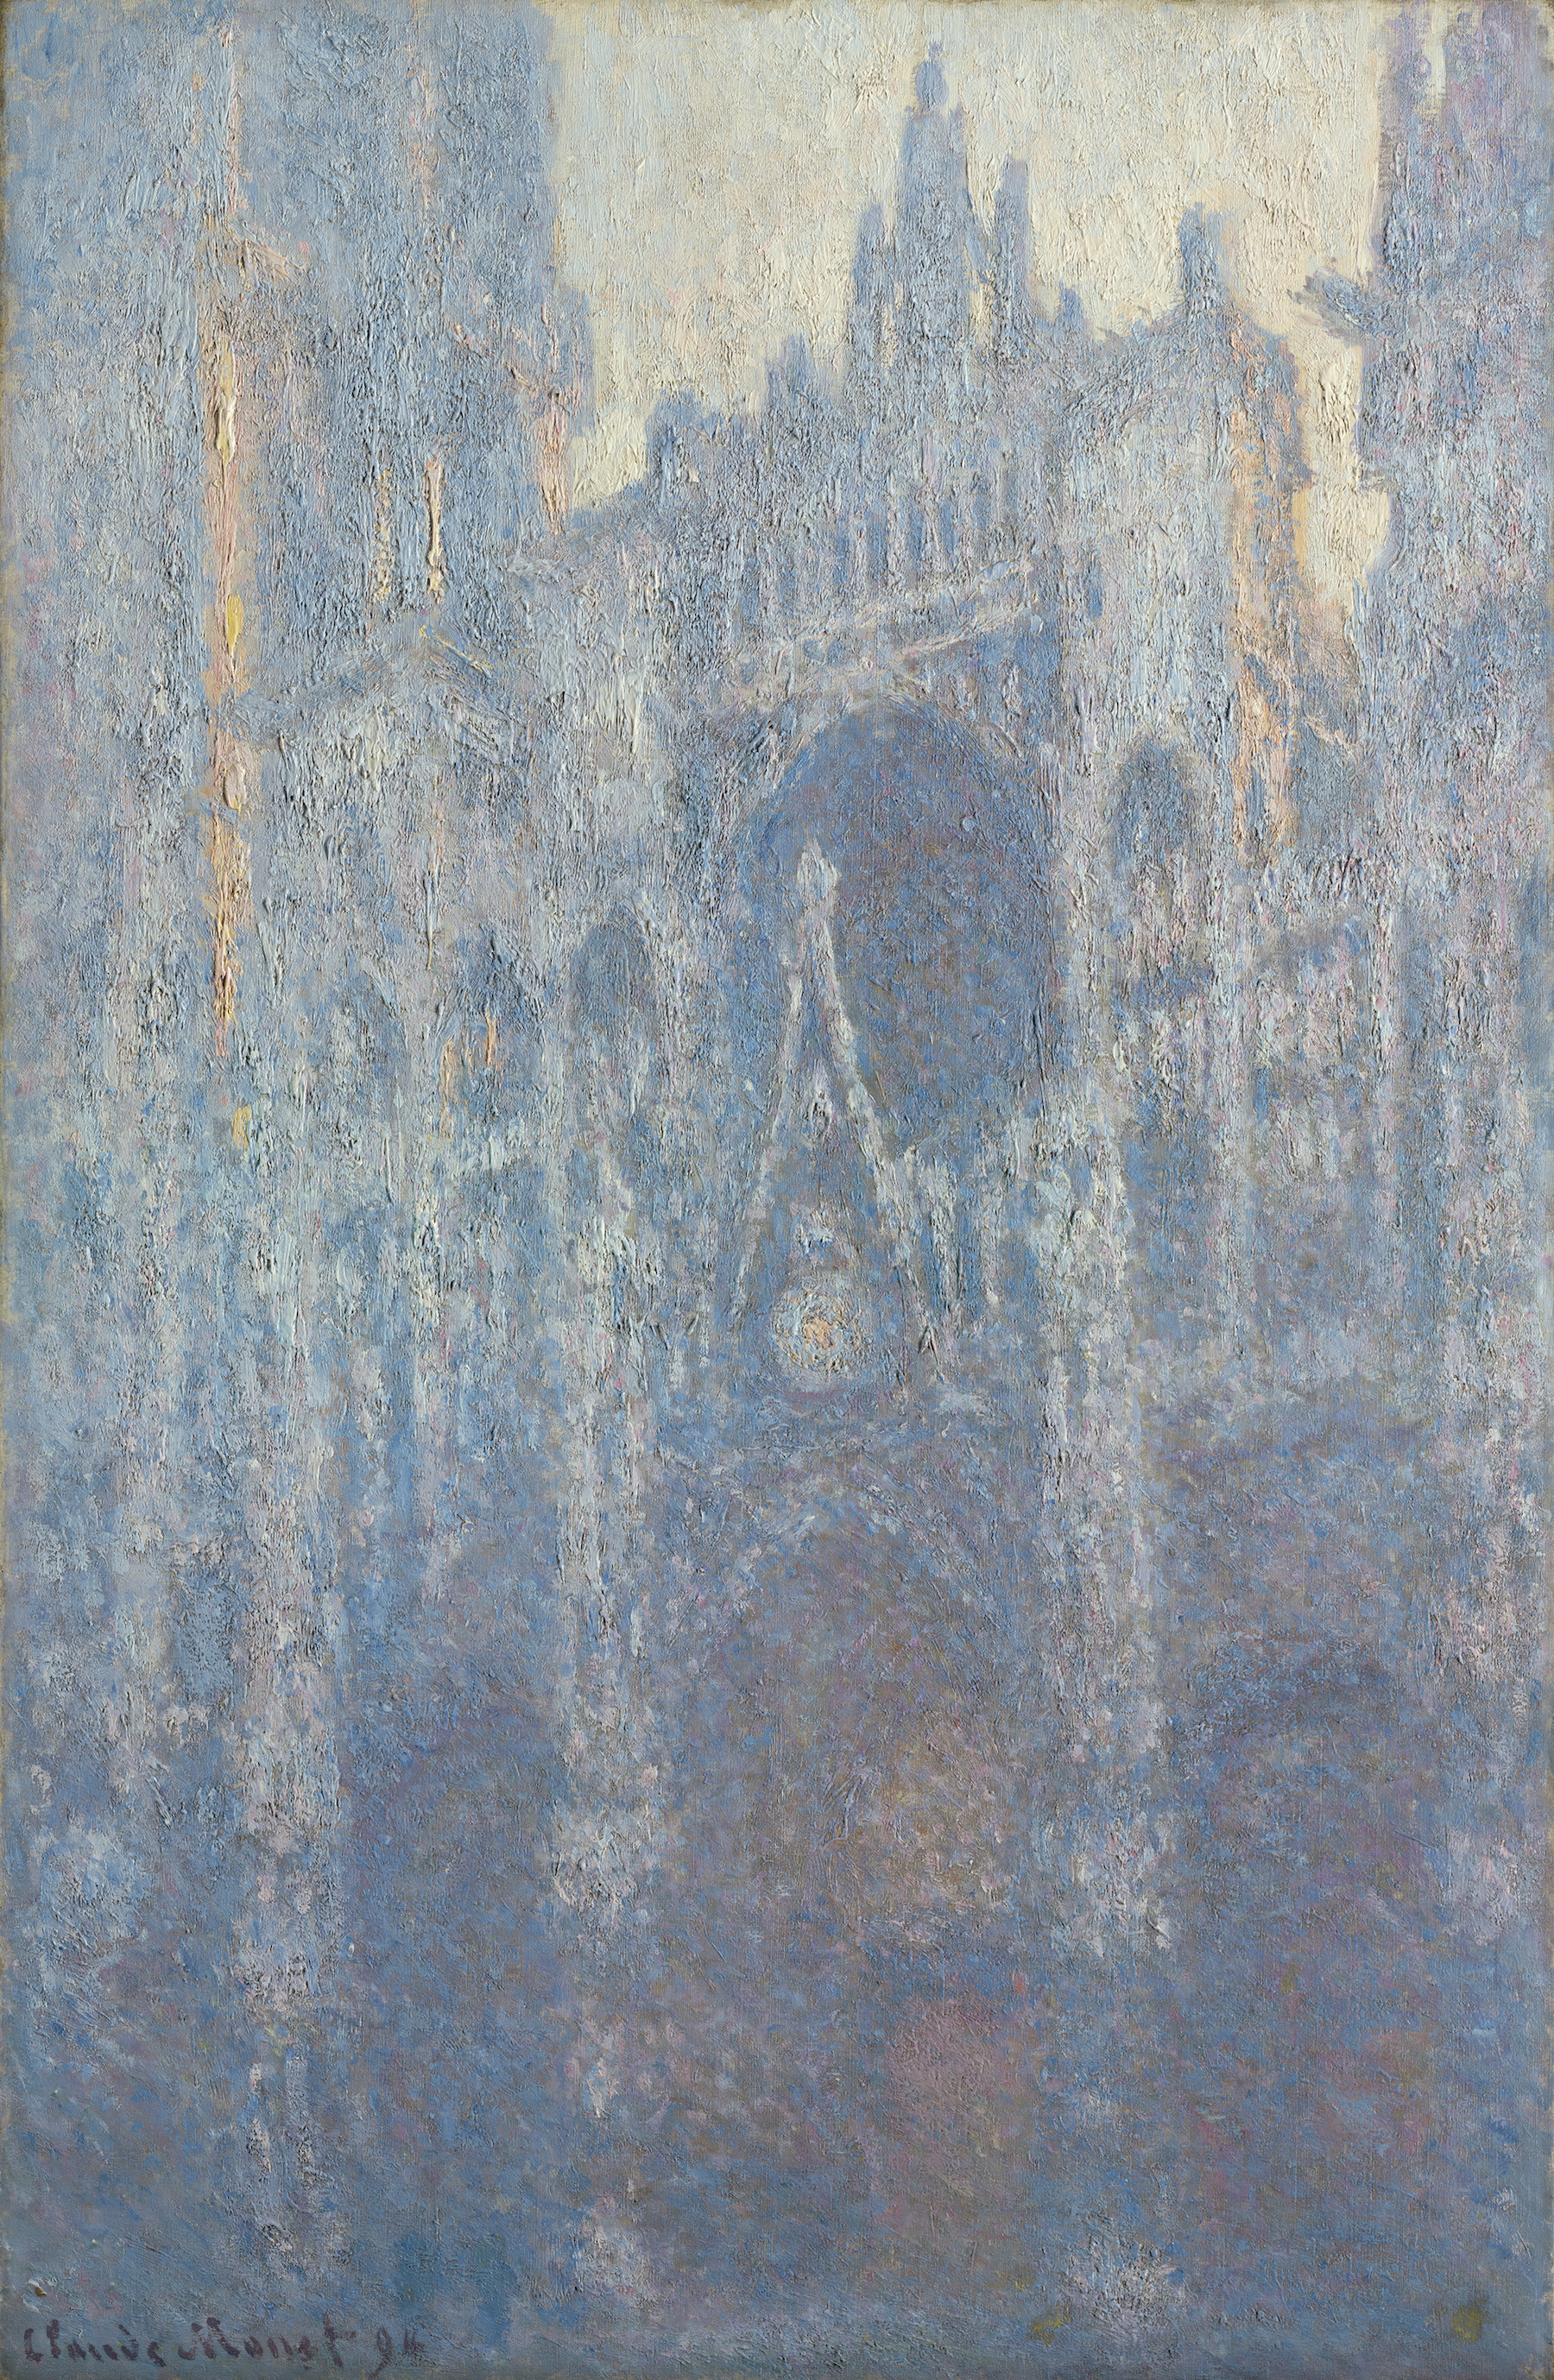 The Portal of Rouen Cathedral in Morning Light by Claude Monet - 1894 - 100.3 × 65.1 cm J. Paul Getty Museum